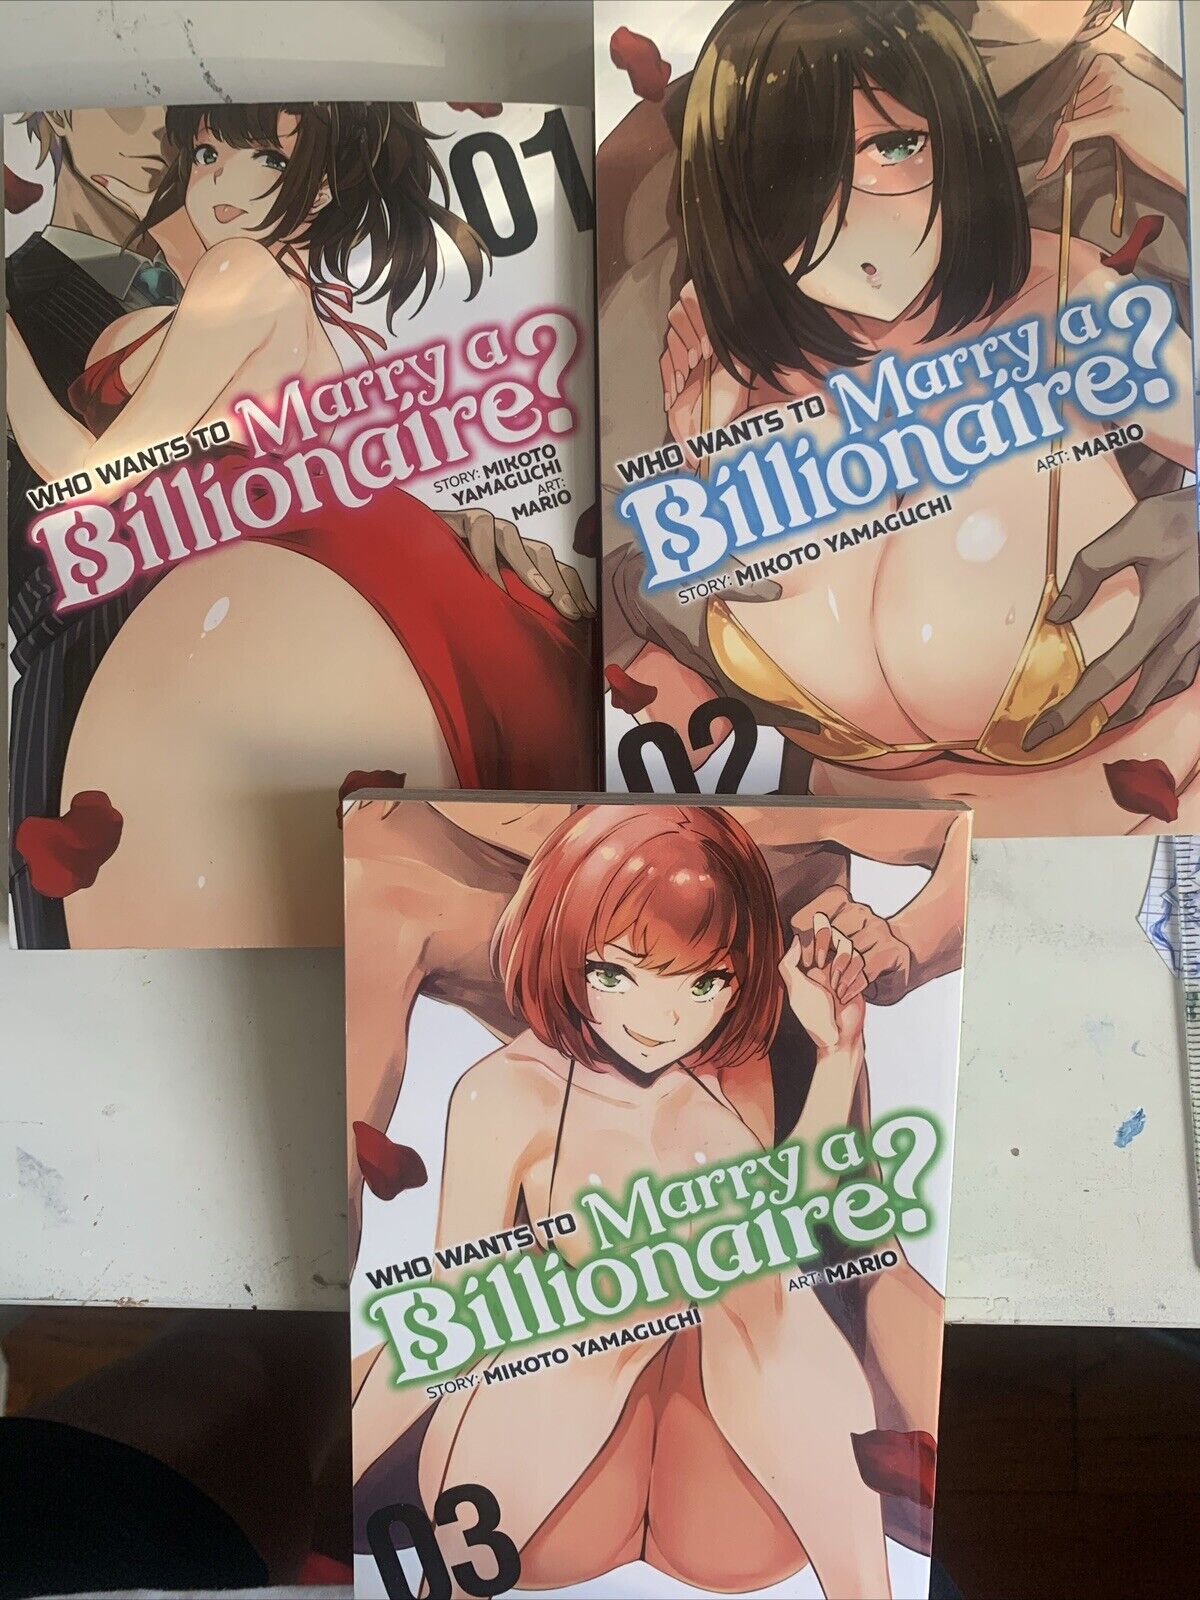 Who Wants To Marry A Billionaire ? MANGA Vop 1-3, By Mikoto Yamaguchi.